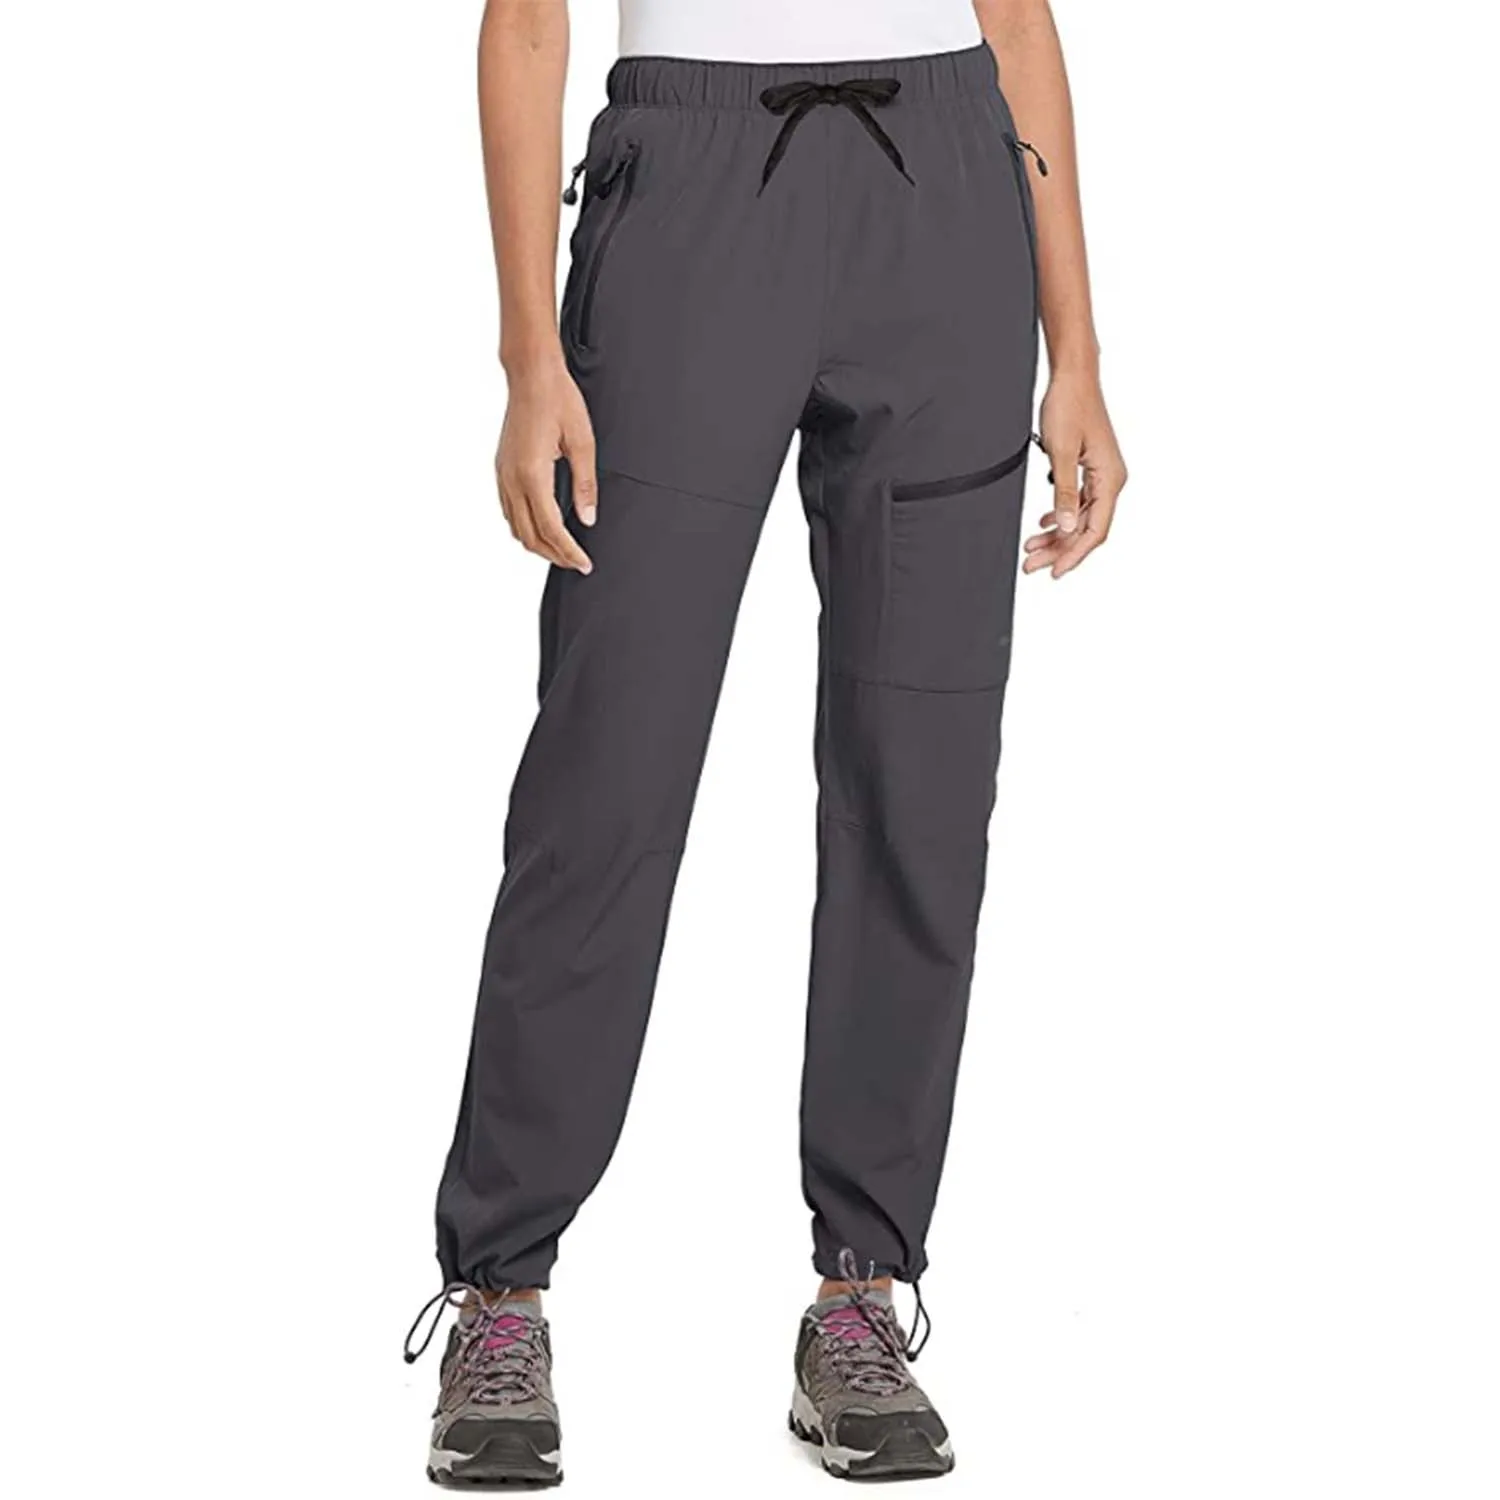 with Zipper Pockets Cargo Hiking Pants for Women Lightweight Quick Dry Water Resistant Outdoor Joggers Pants UPF 50 